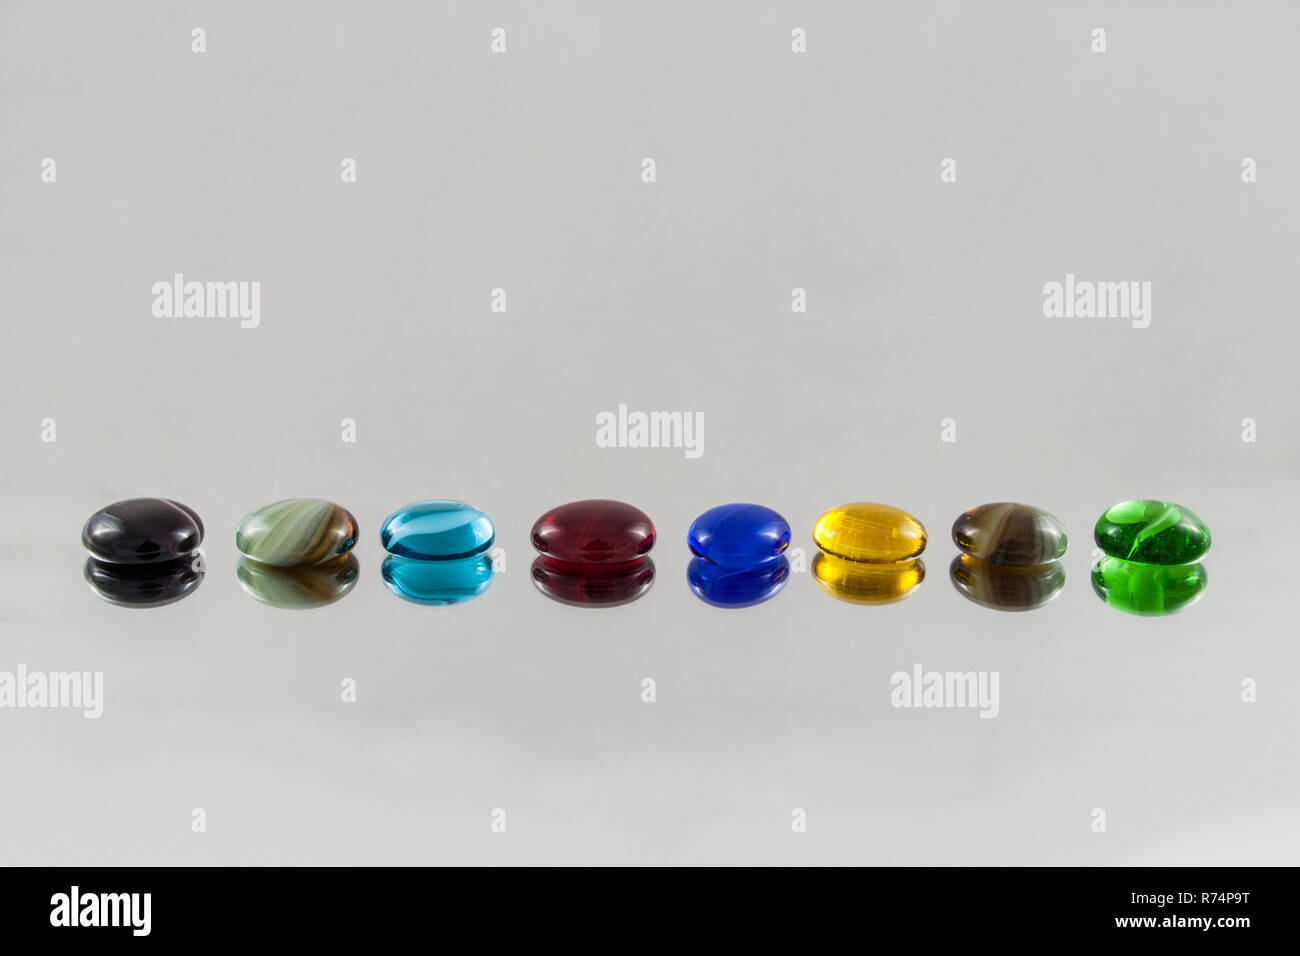 Arranged glass gems with blurred reflections Stock Photo